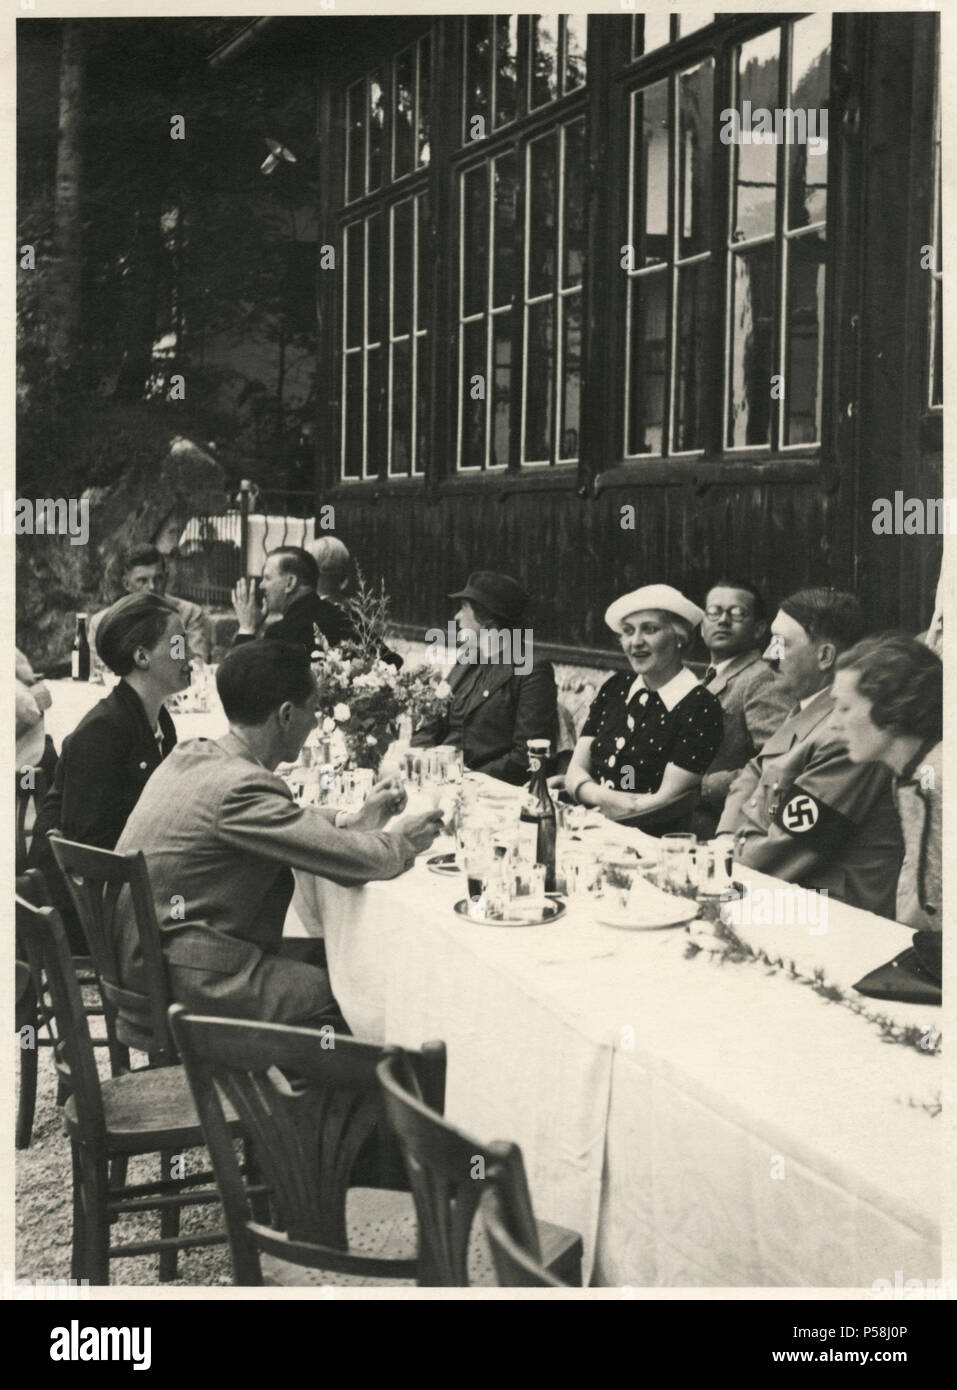 Adolf Hitler and Joseph Goebbels at Dinner Banquet, Germany, 1938 Stock Photo